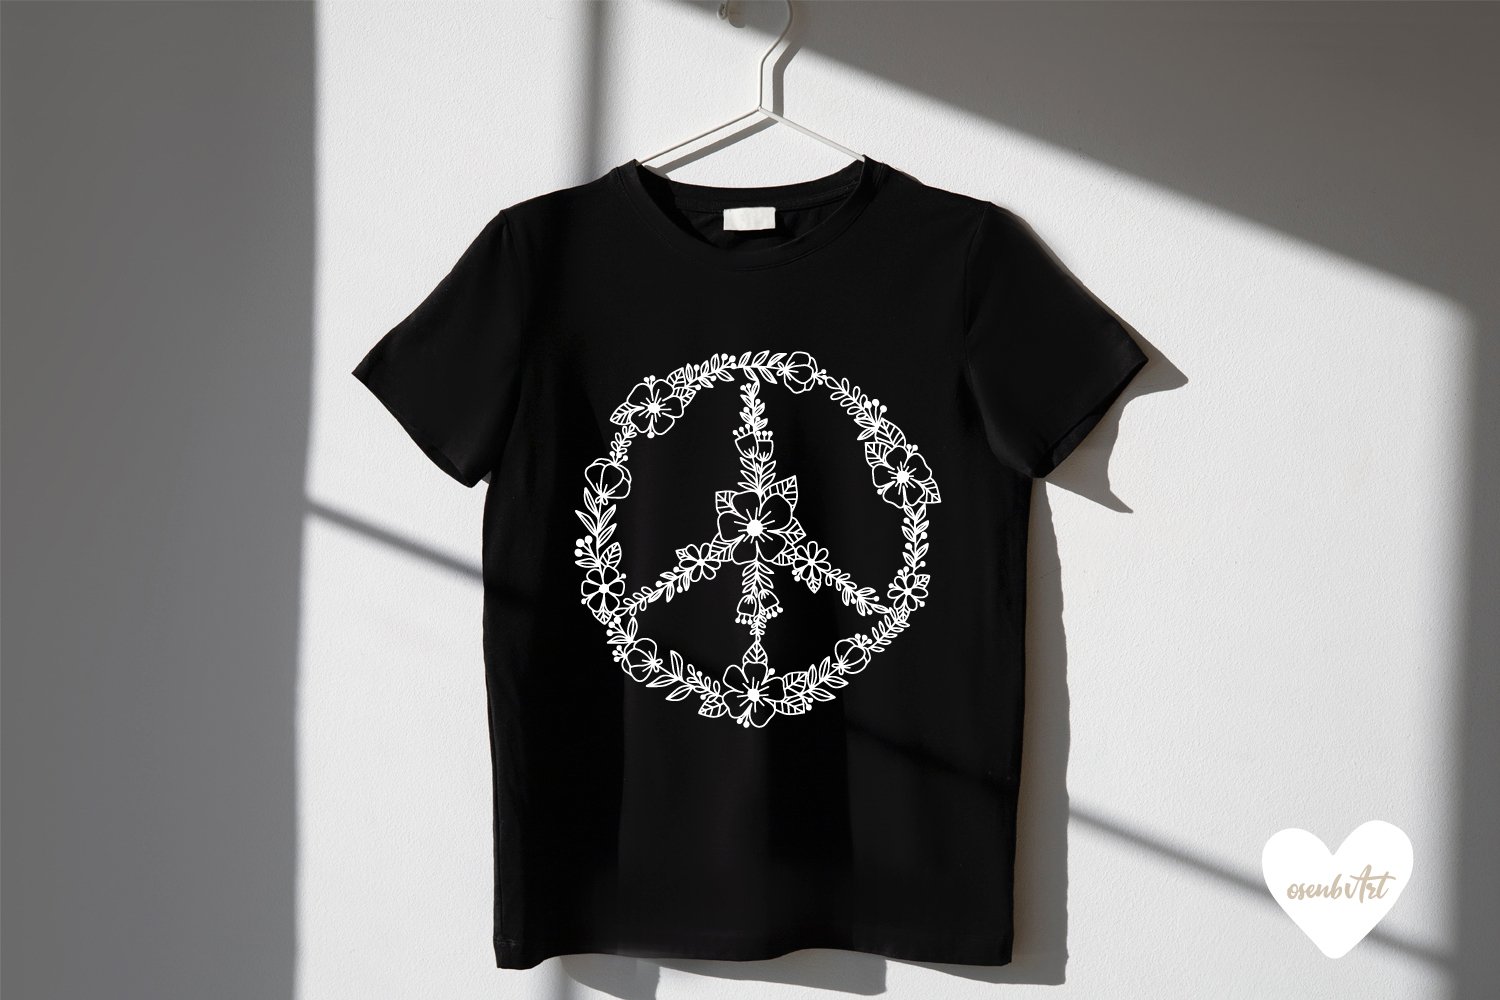 Black t-shirt with a white peace sign.